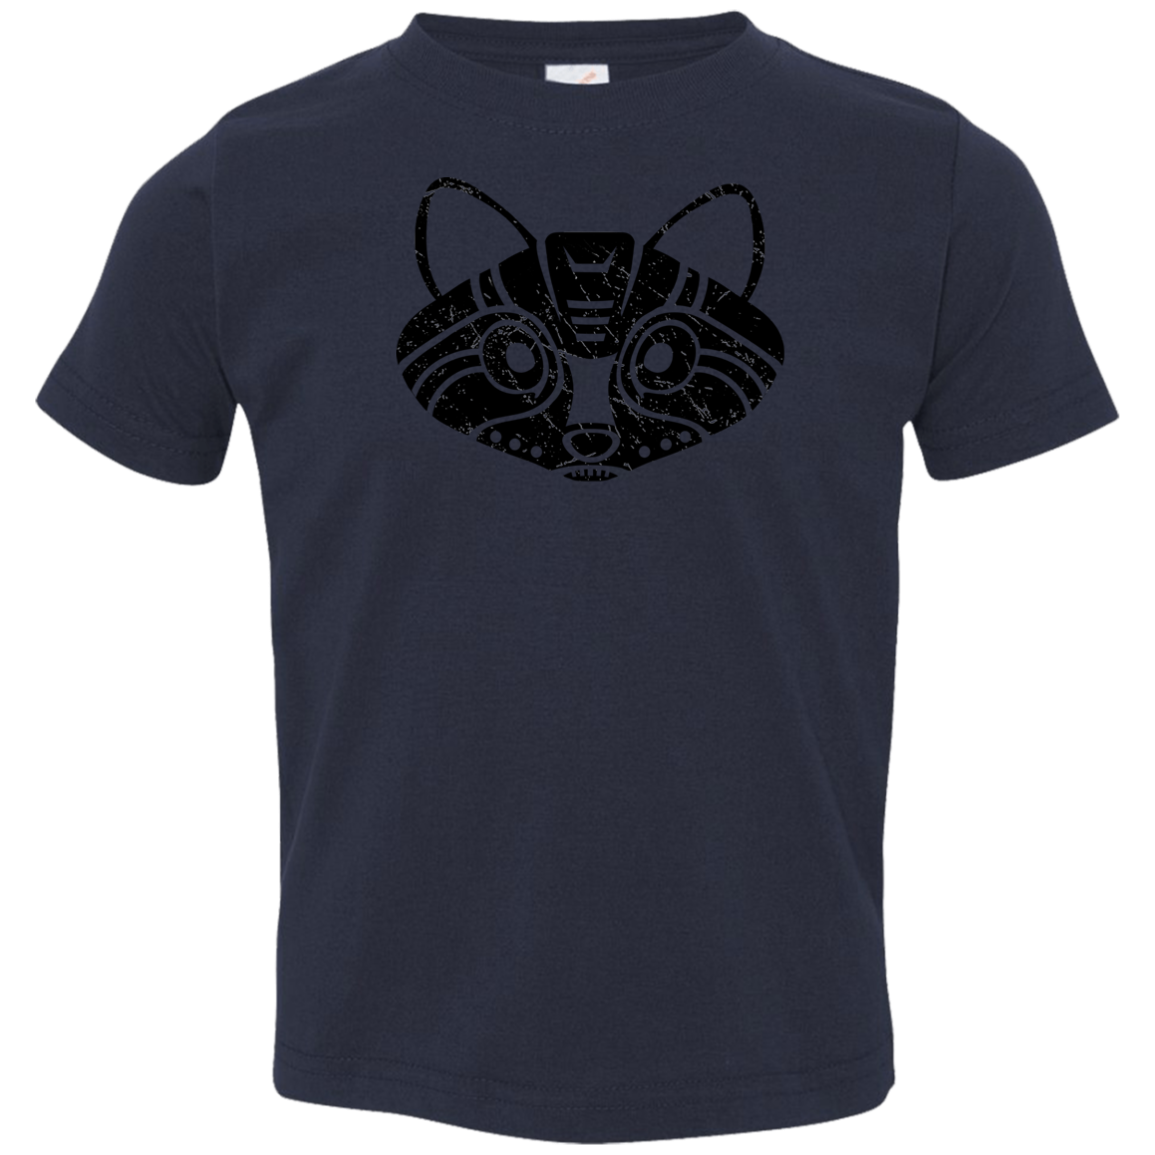 Black Distressed Emblem T-Shirts for Toddlers (Raccoon/Pilfer) - Dark Corps